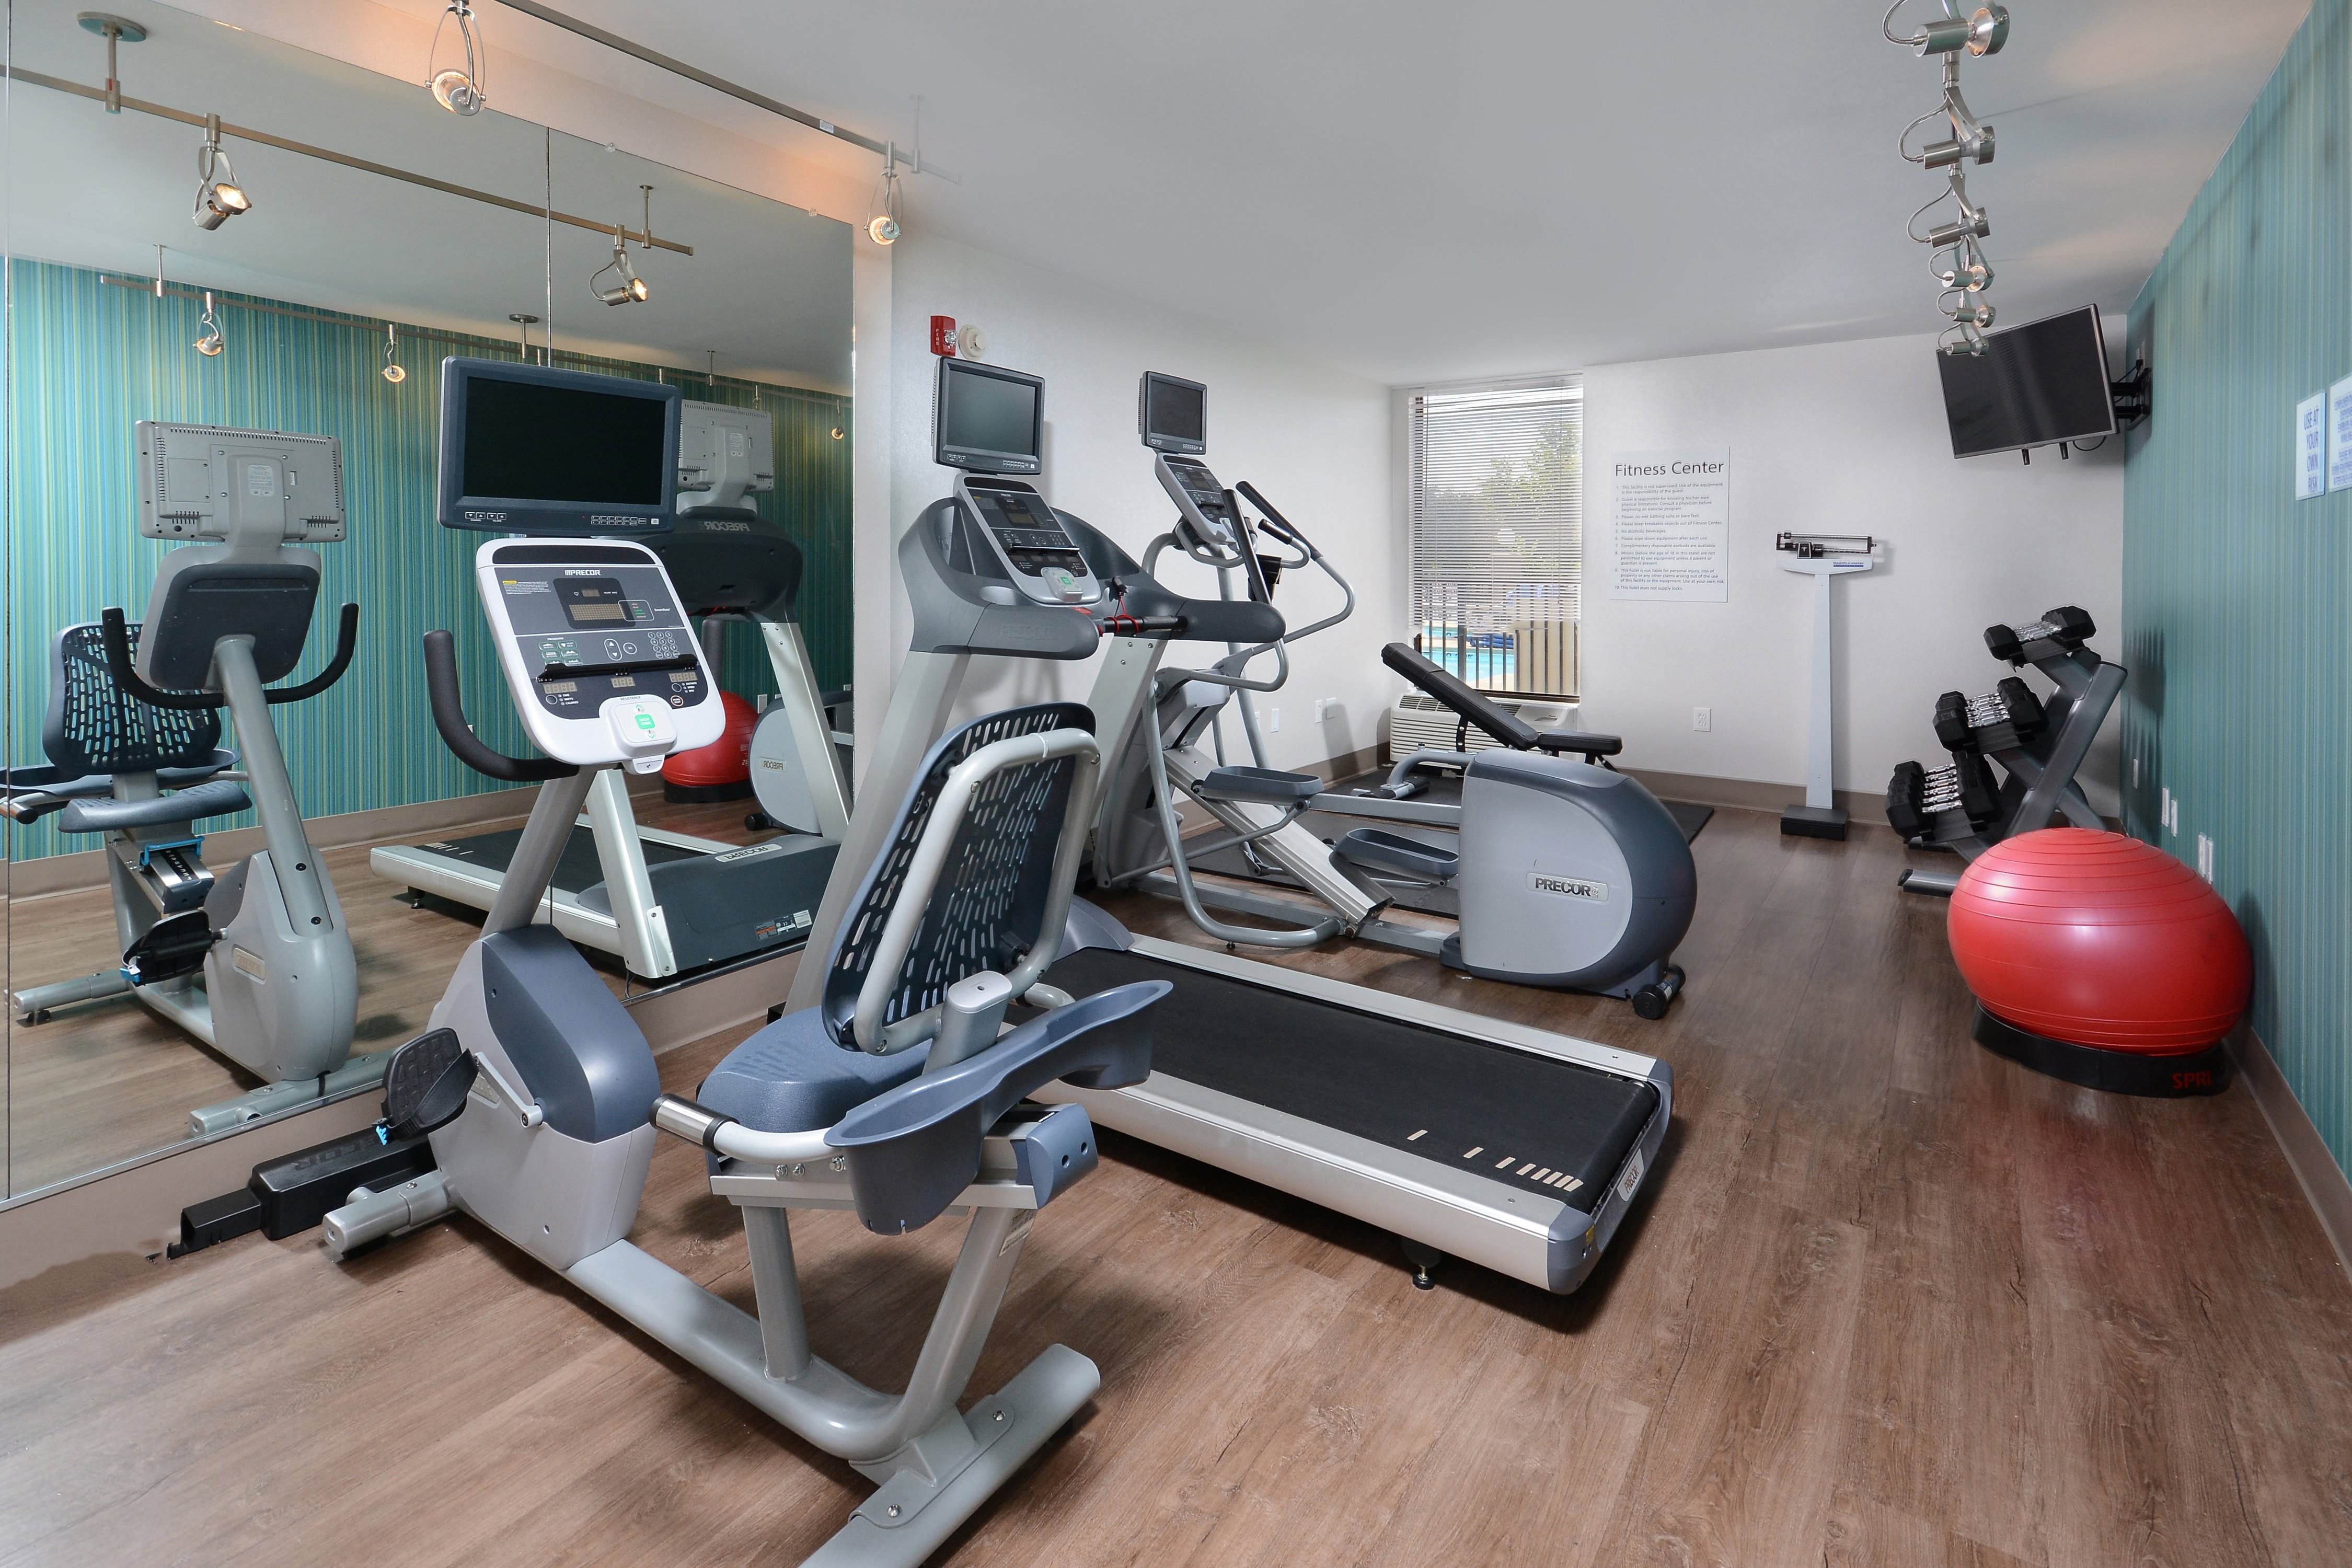 Keep fit while on the road with our 24 hour fitness center.